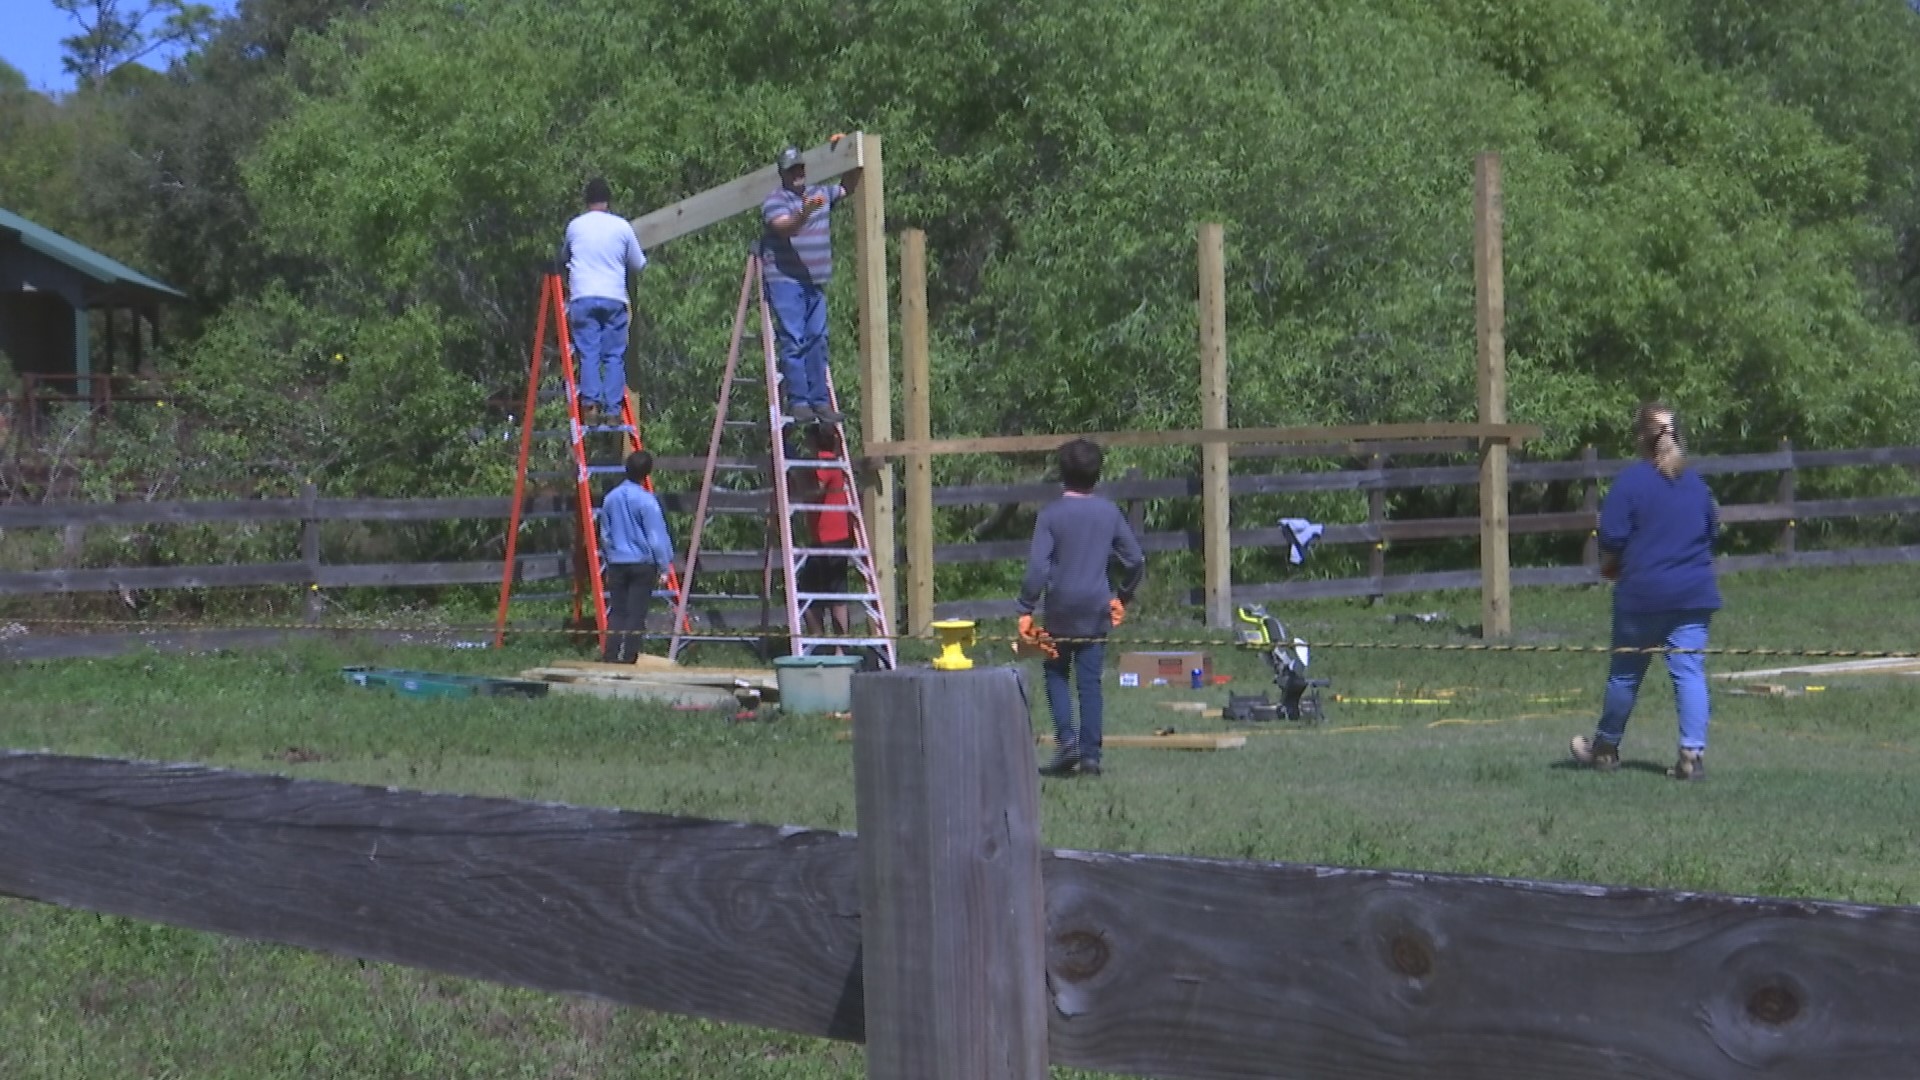 Max Mangone leads volunteers creating horse shelters at Miles Ranch as his Eagle Scout project. (Credit: WINK News)